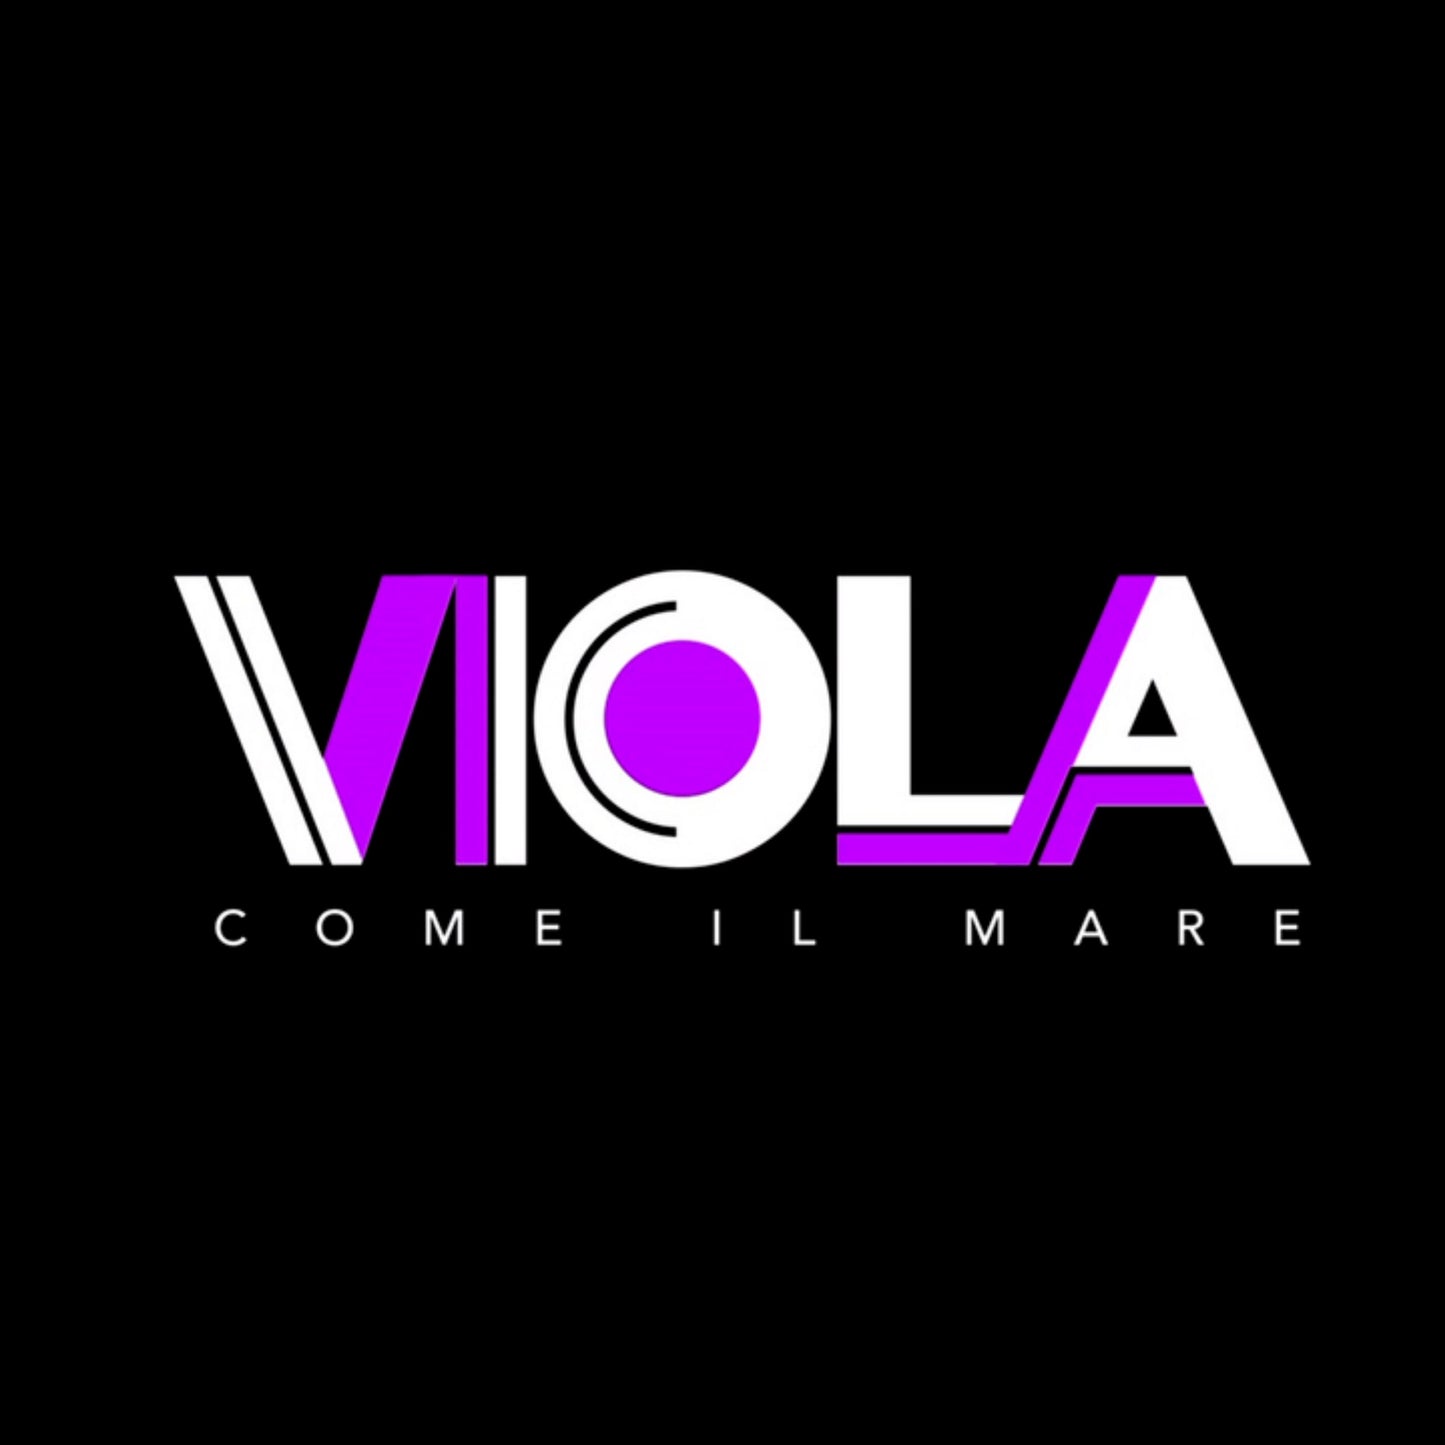 Viola Come İl Mare English Subtitles DVD | Purple Like the Sea Can Yaman New Tv Series Original Voices *No Adverts* Can Yaman DVD